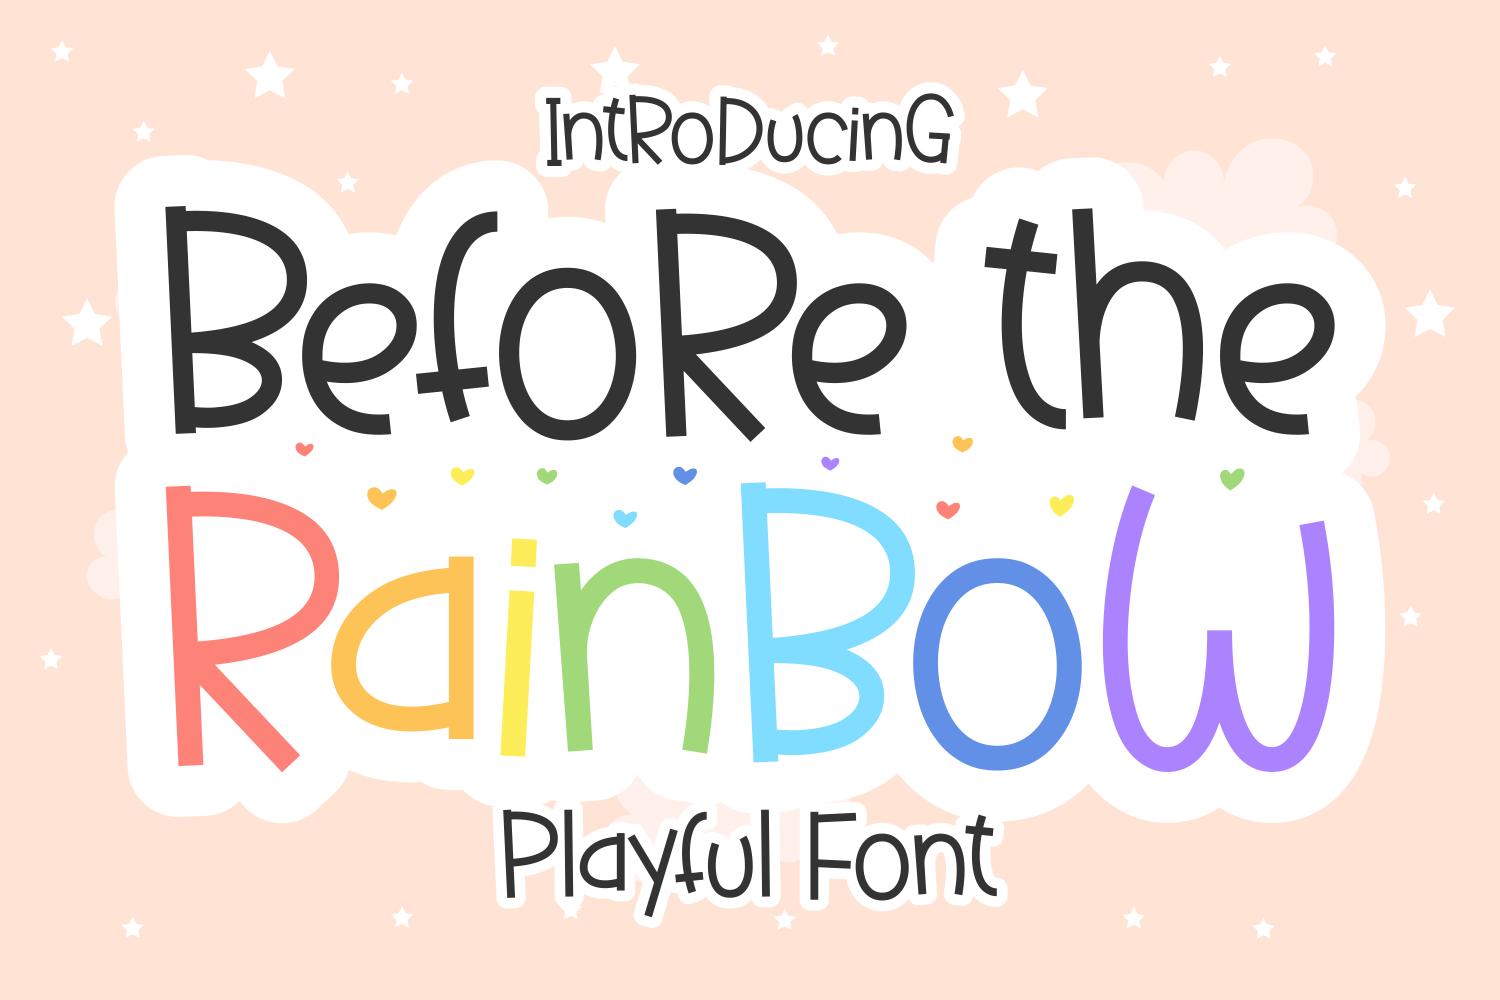 A free playful colorful font